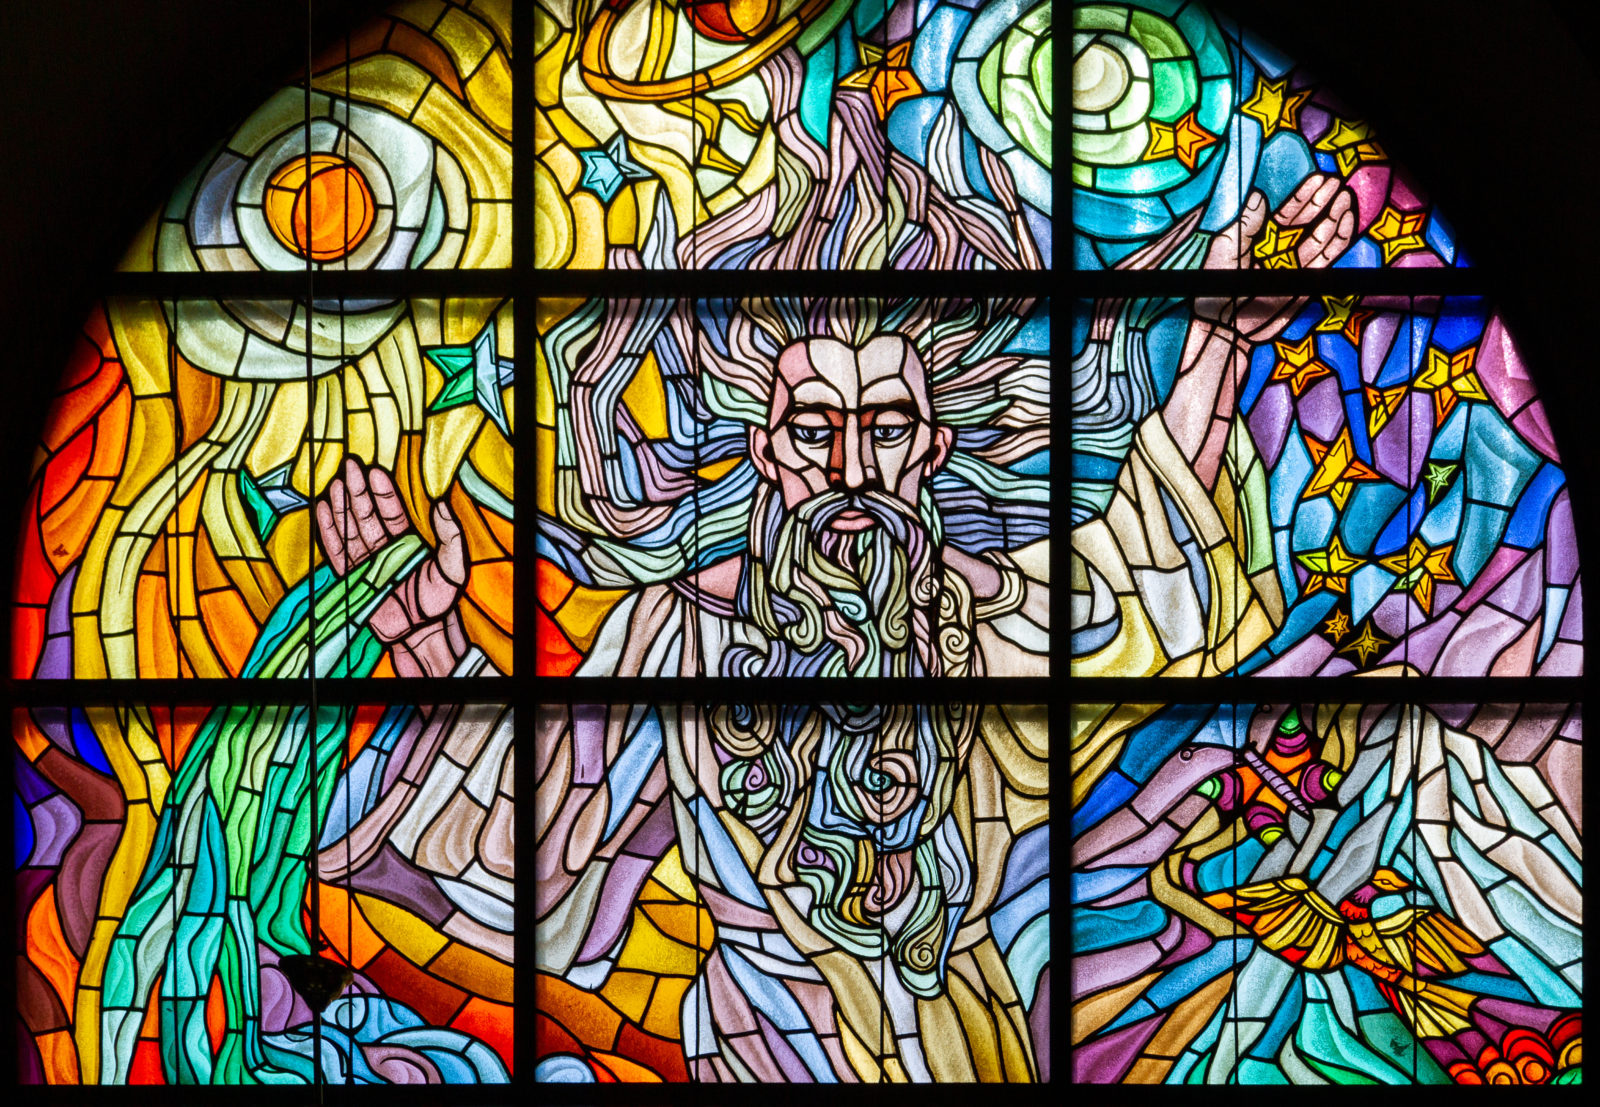 Zegiestow, Poland. 2019/8/10. Stained-glass window depicting the Creation of the World with the words 